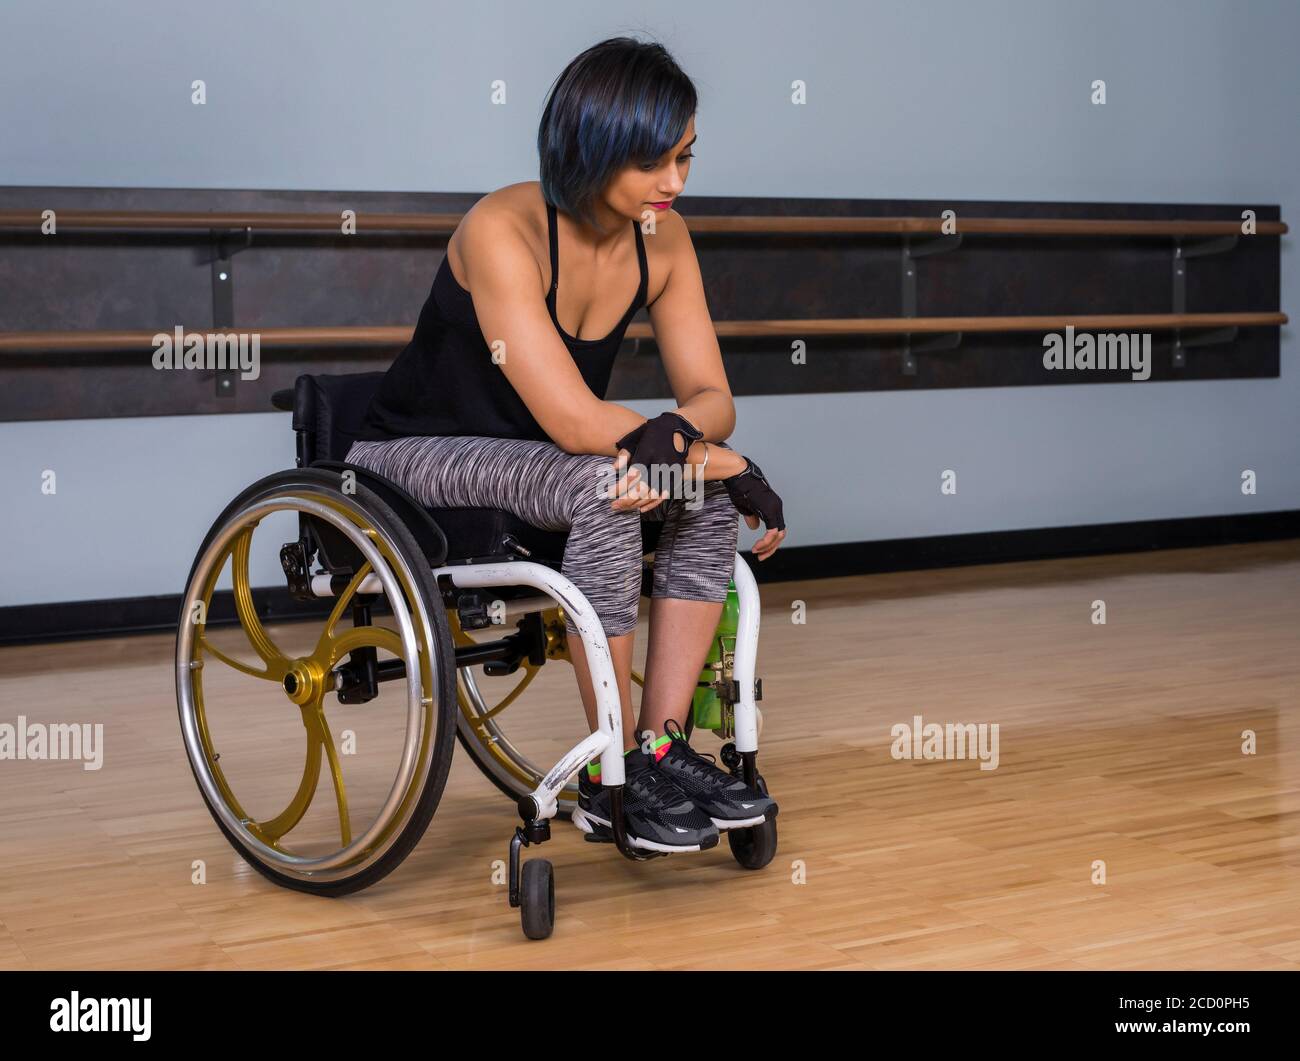 A paraplegic woman looking discouraged while taking a break from working out in a recreational facility: Edmonton, Alberta, Canada Stock Photo